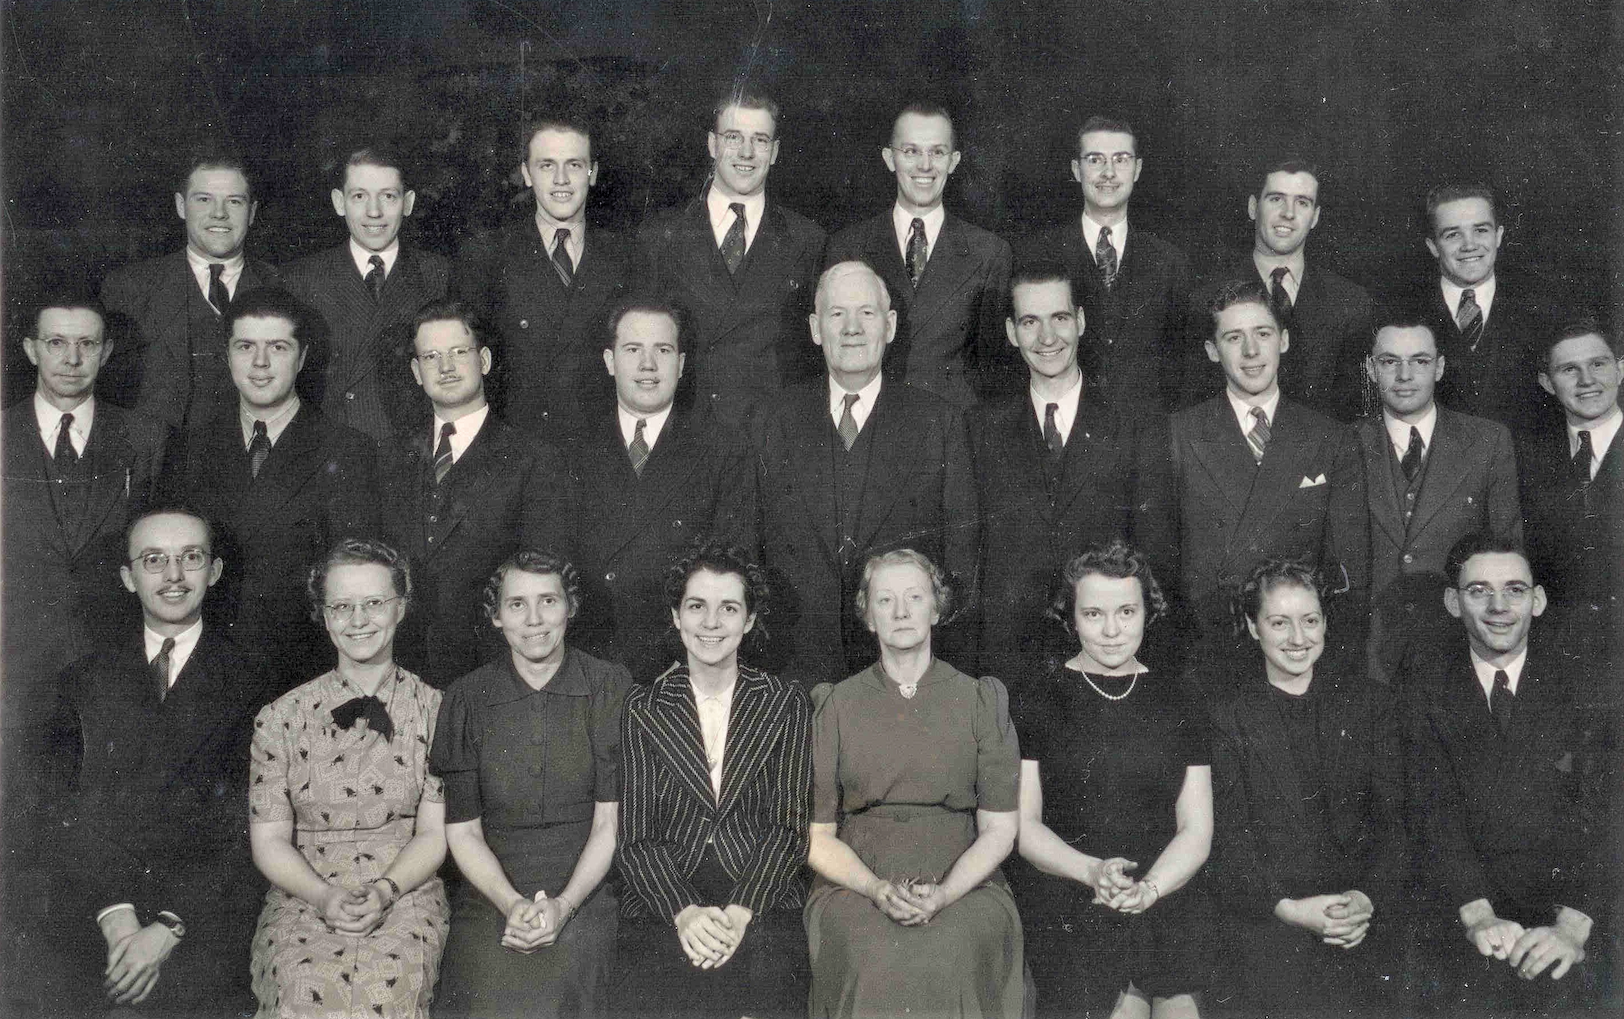 Central States Mission Group, Circa 1940 March